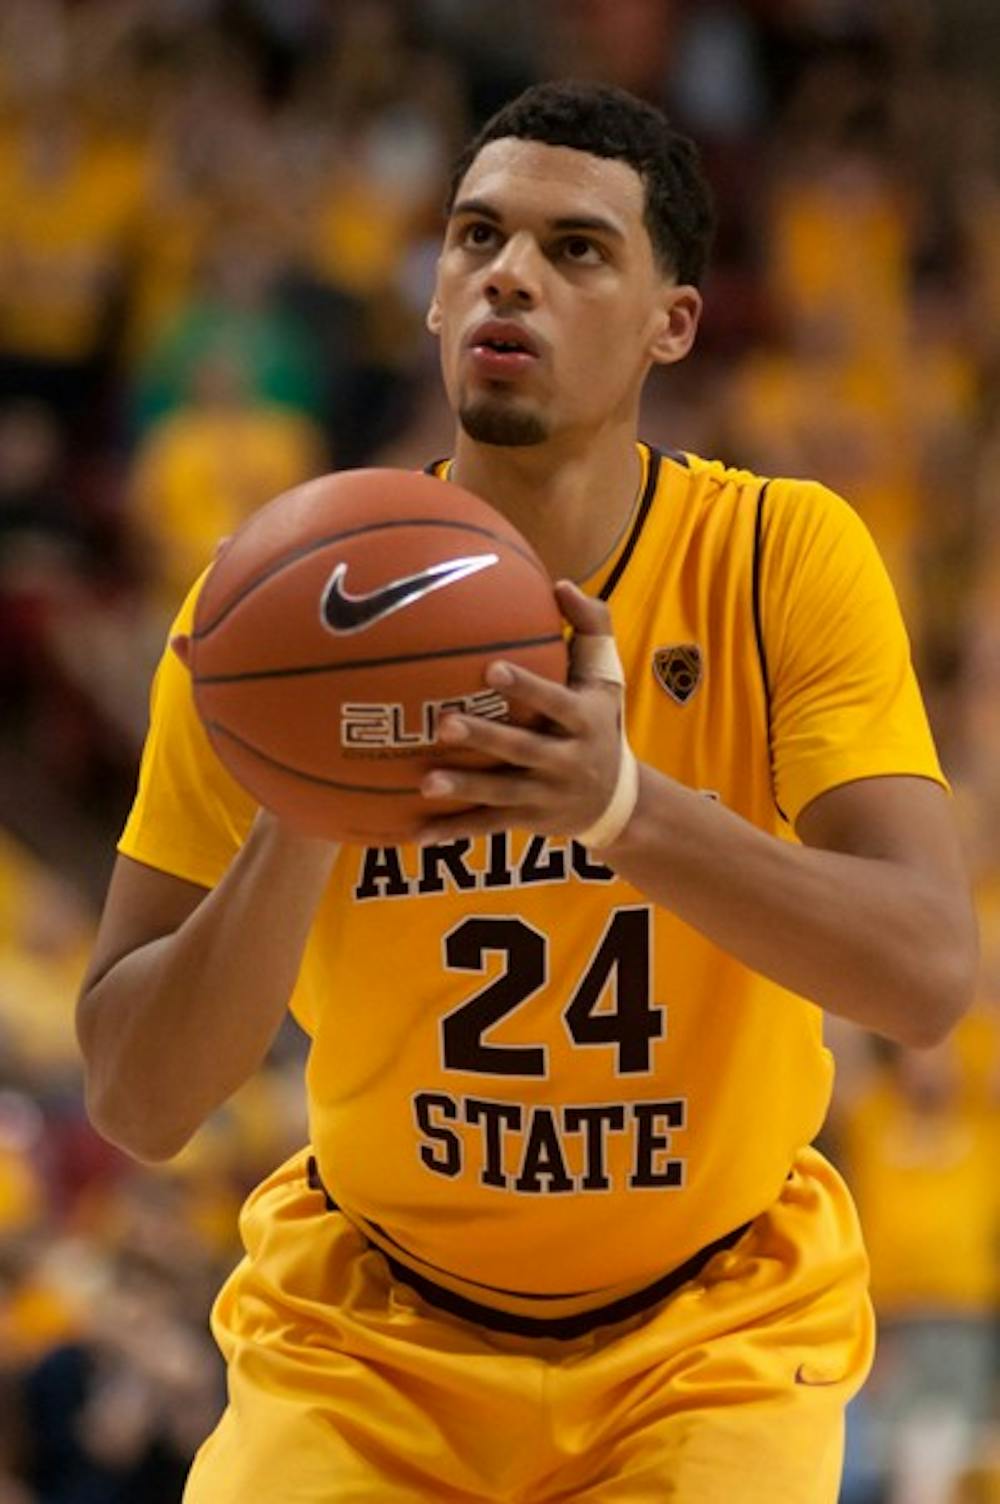 Rough Shooting: ASU sophomore guard Trent Lockett shoots a free throw during a game against Richmond on Dec. 5. The Sun Devils were again dominated in Los Angeles on Saturday, this time by USC with a final score of 62-46.